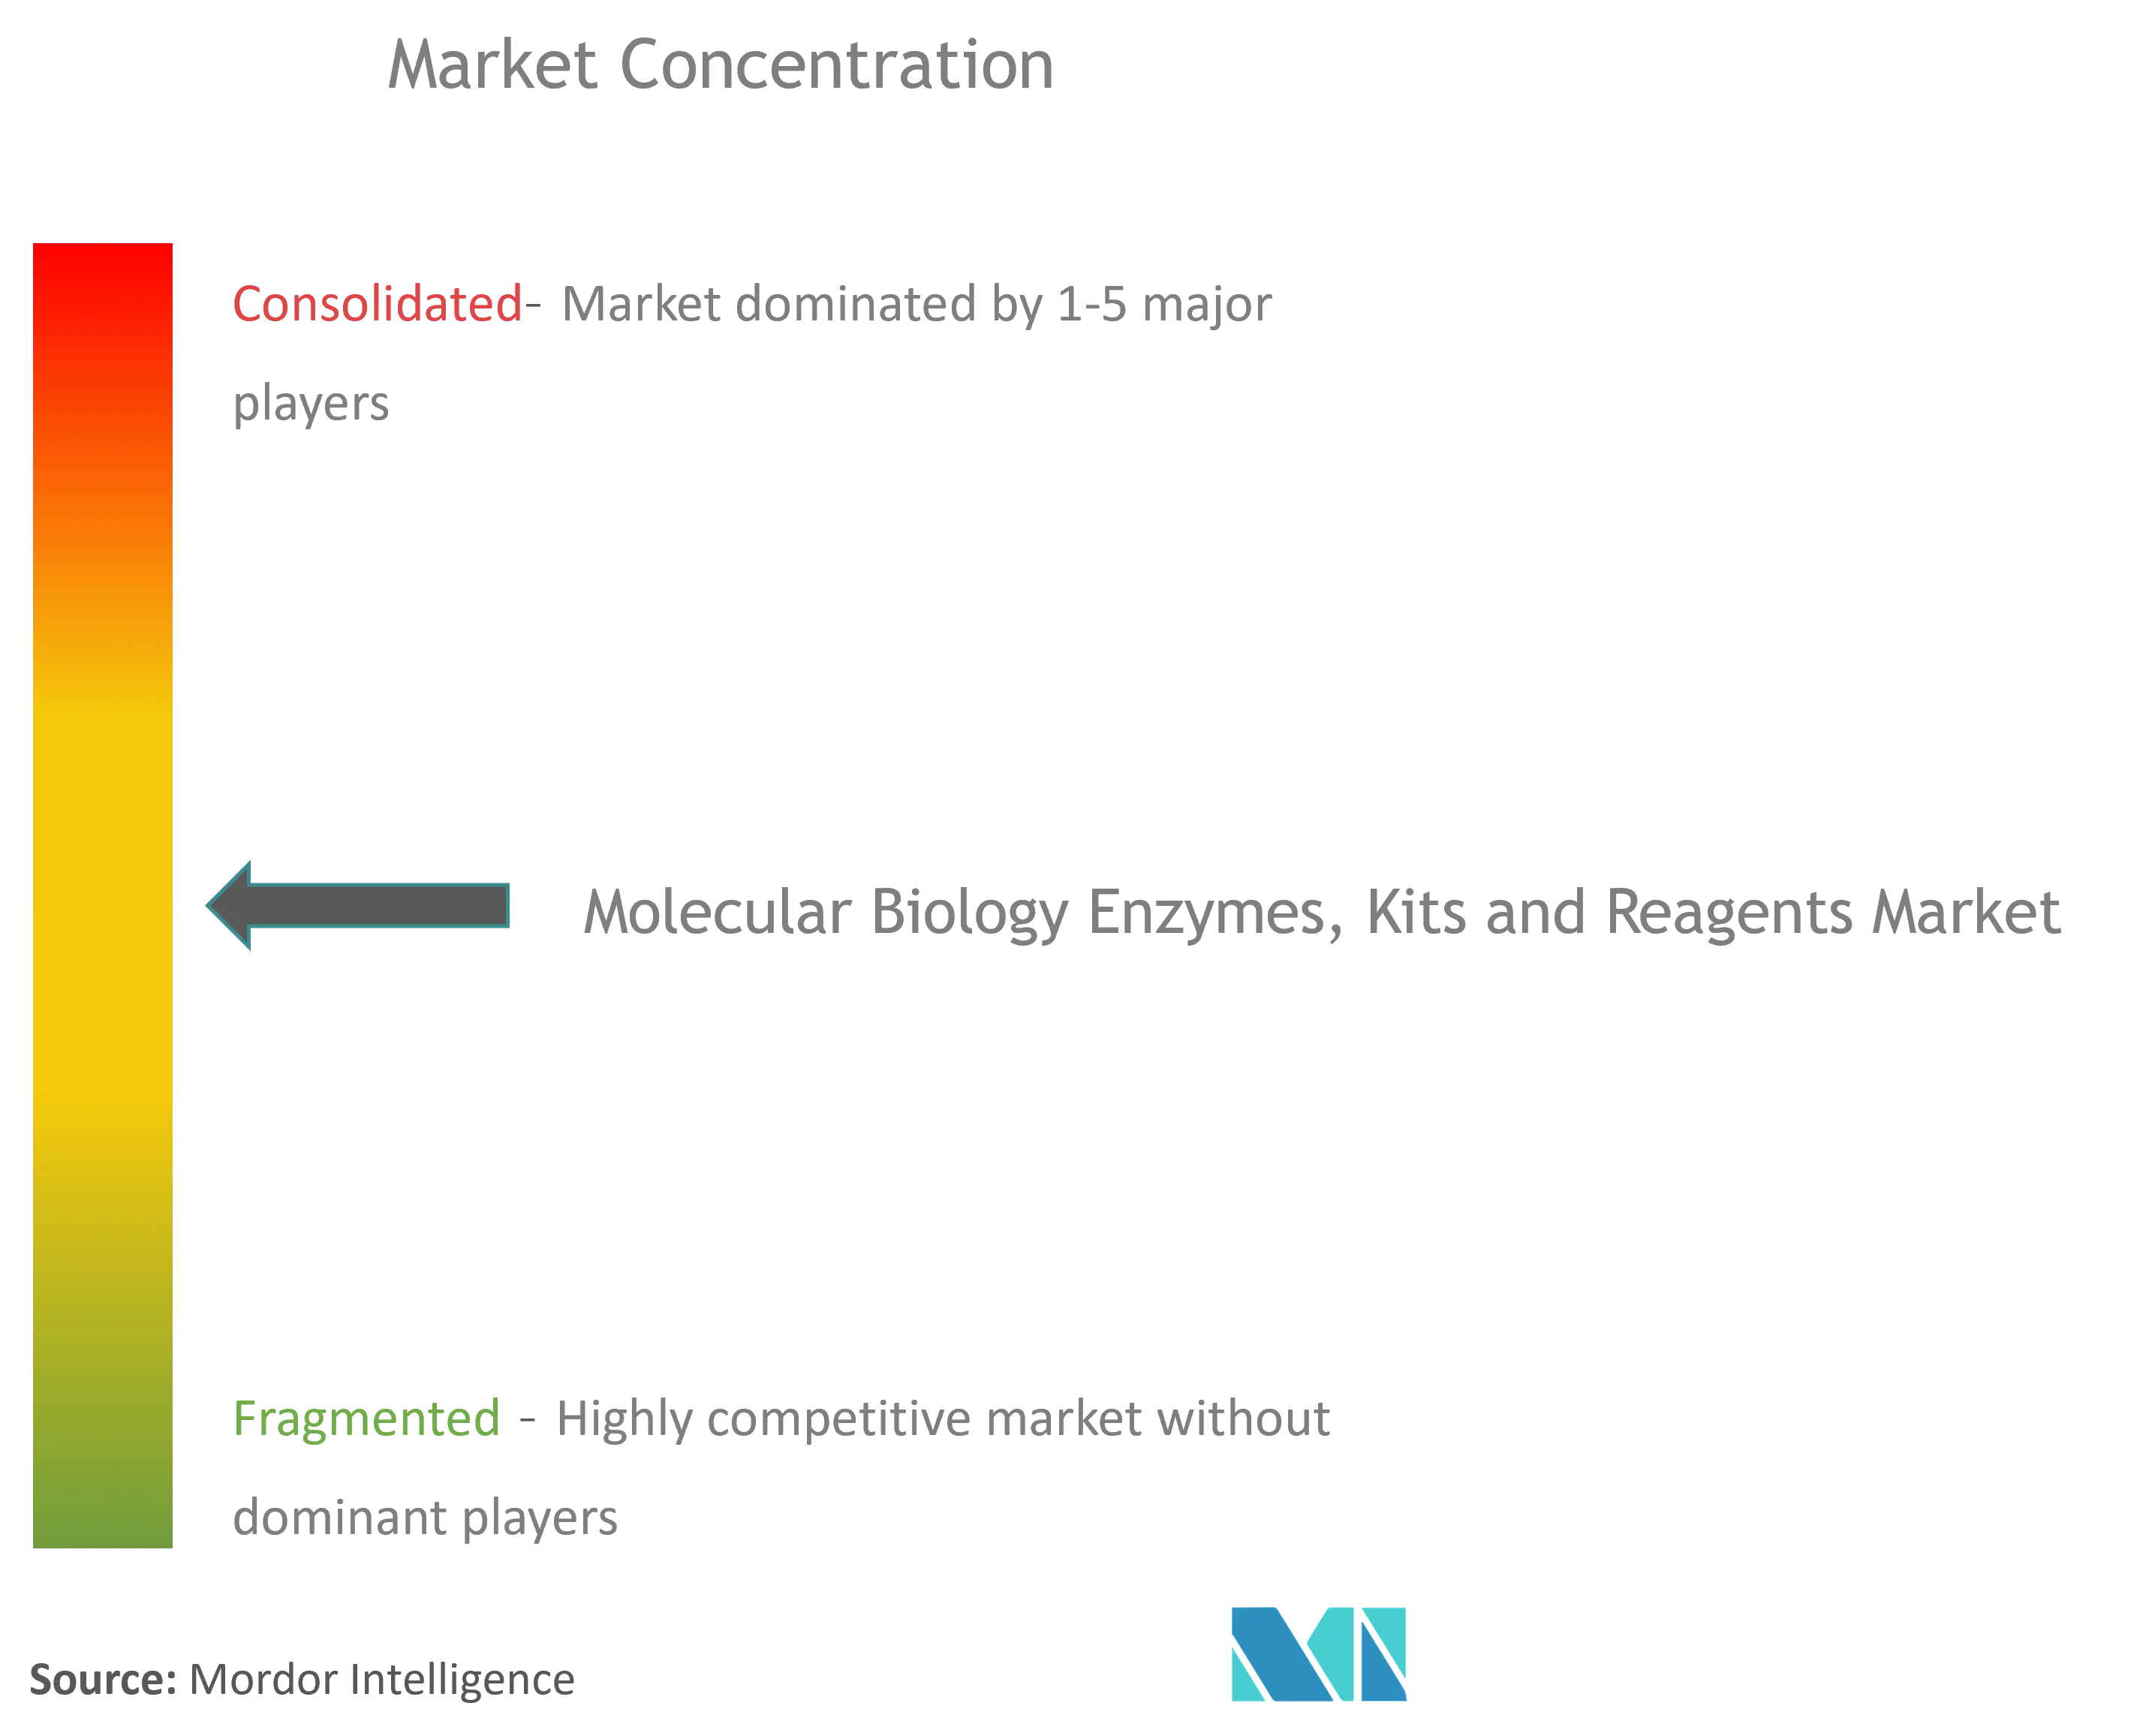 Global Molecular Biology Enzymes, Kits and Reagents Market Concentration